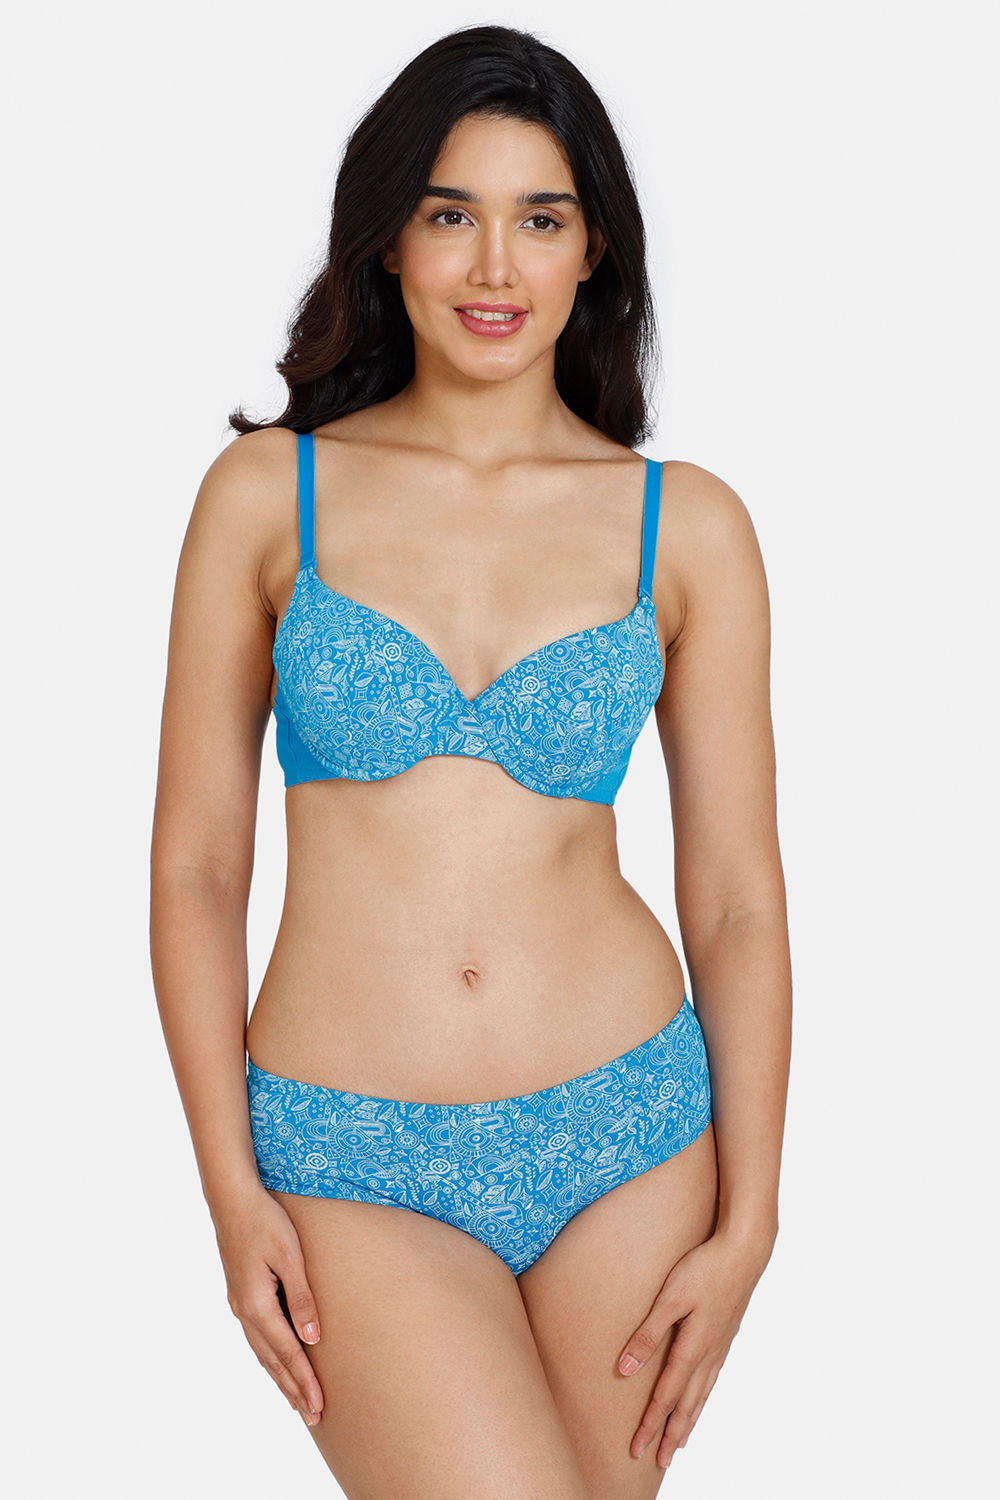 Zivame 36a Size Bras - Get Best Price from Manufacturers & Suppliers in  India